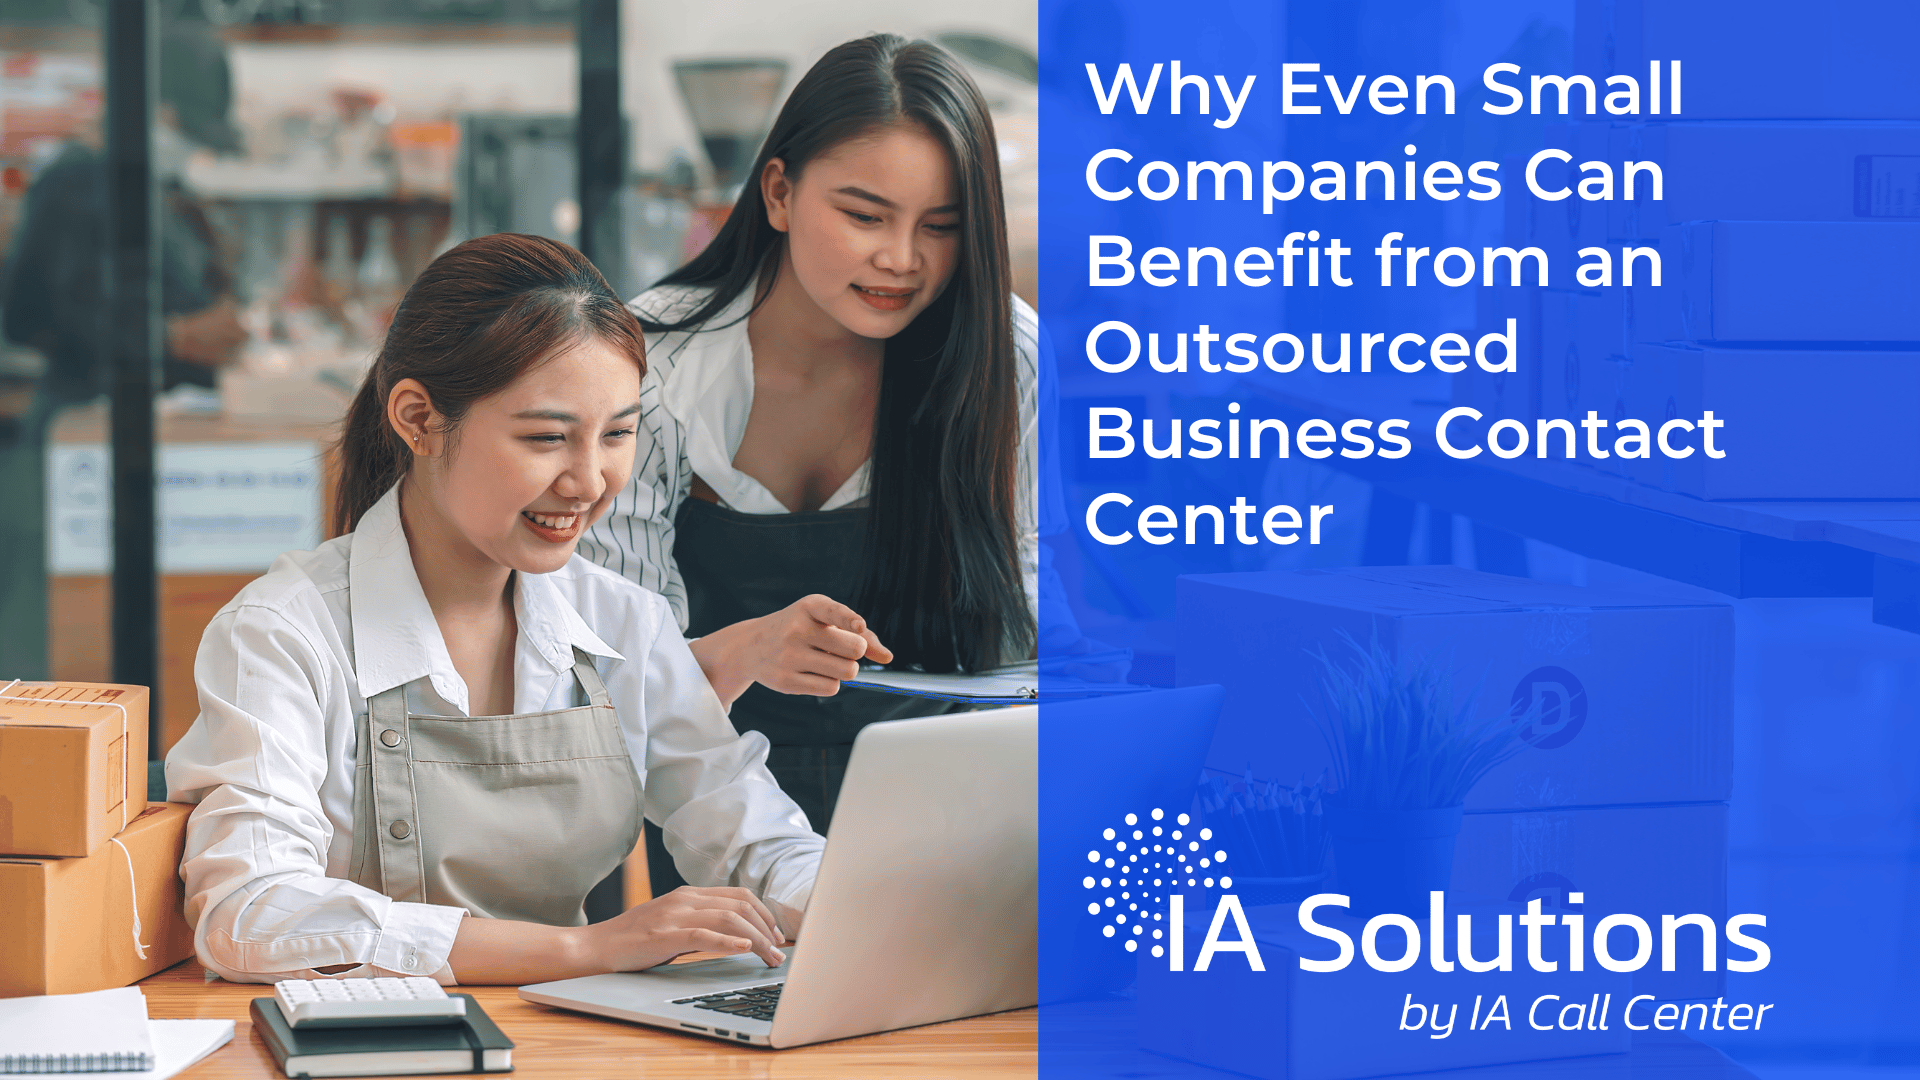 Why Even Small Companies Can Benefit from an Outsourced Business Contact Center